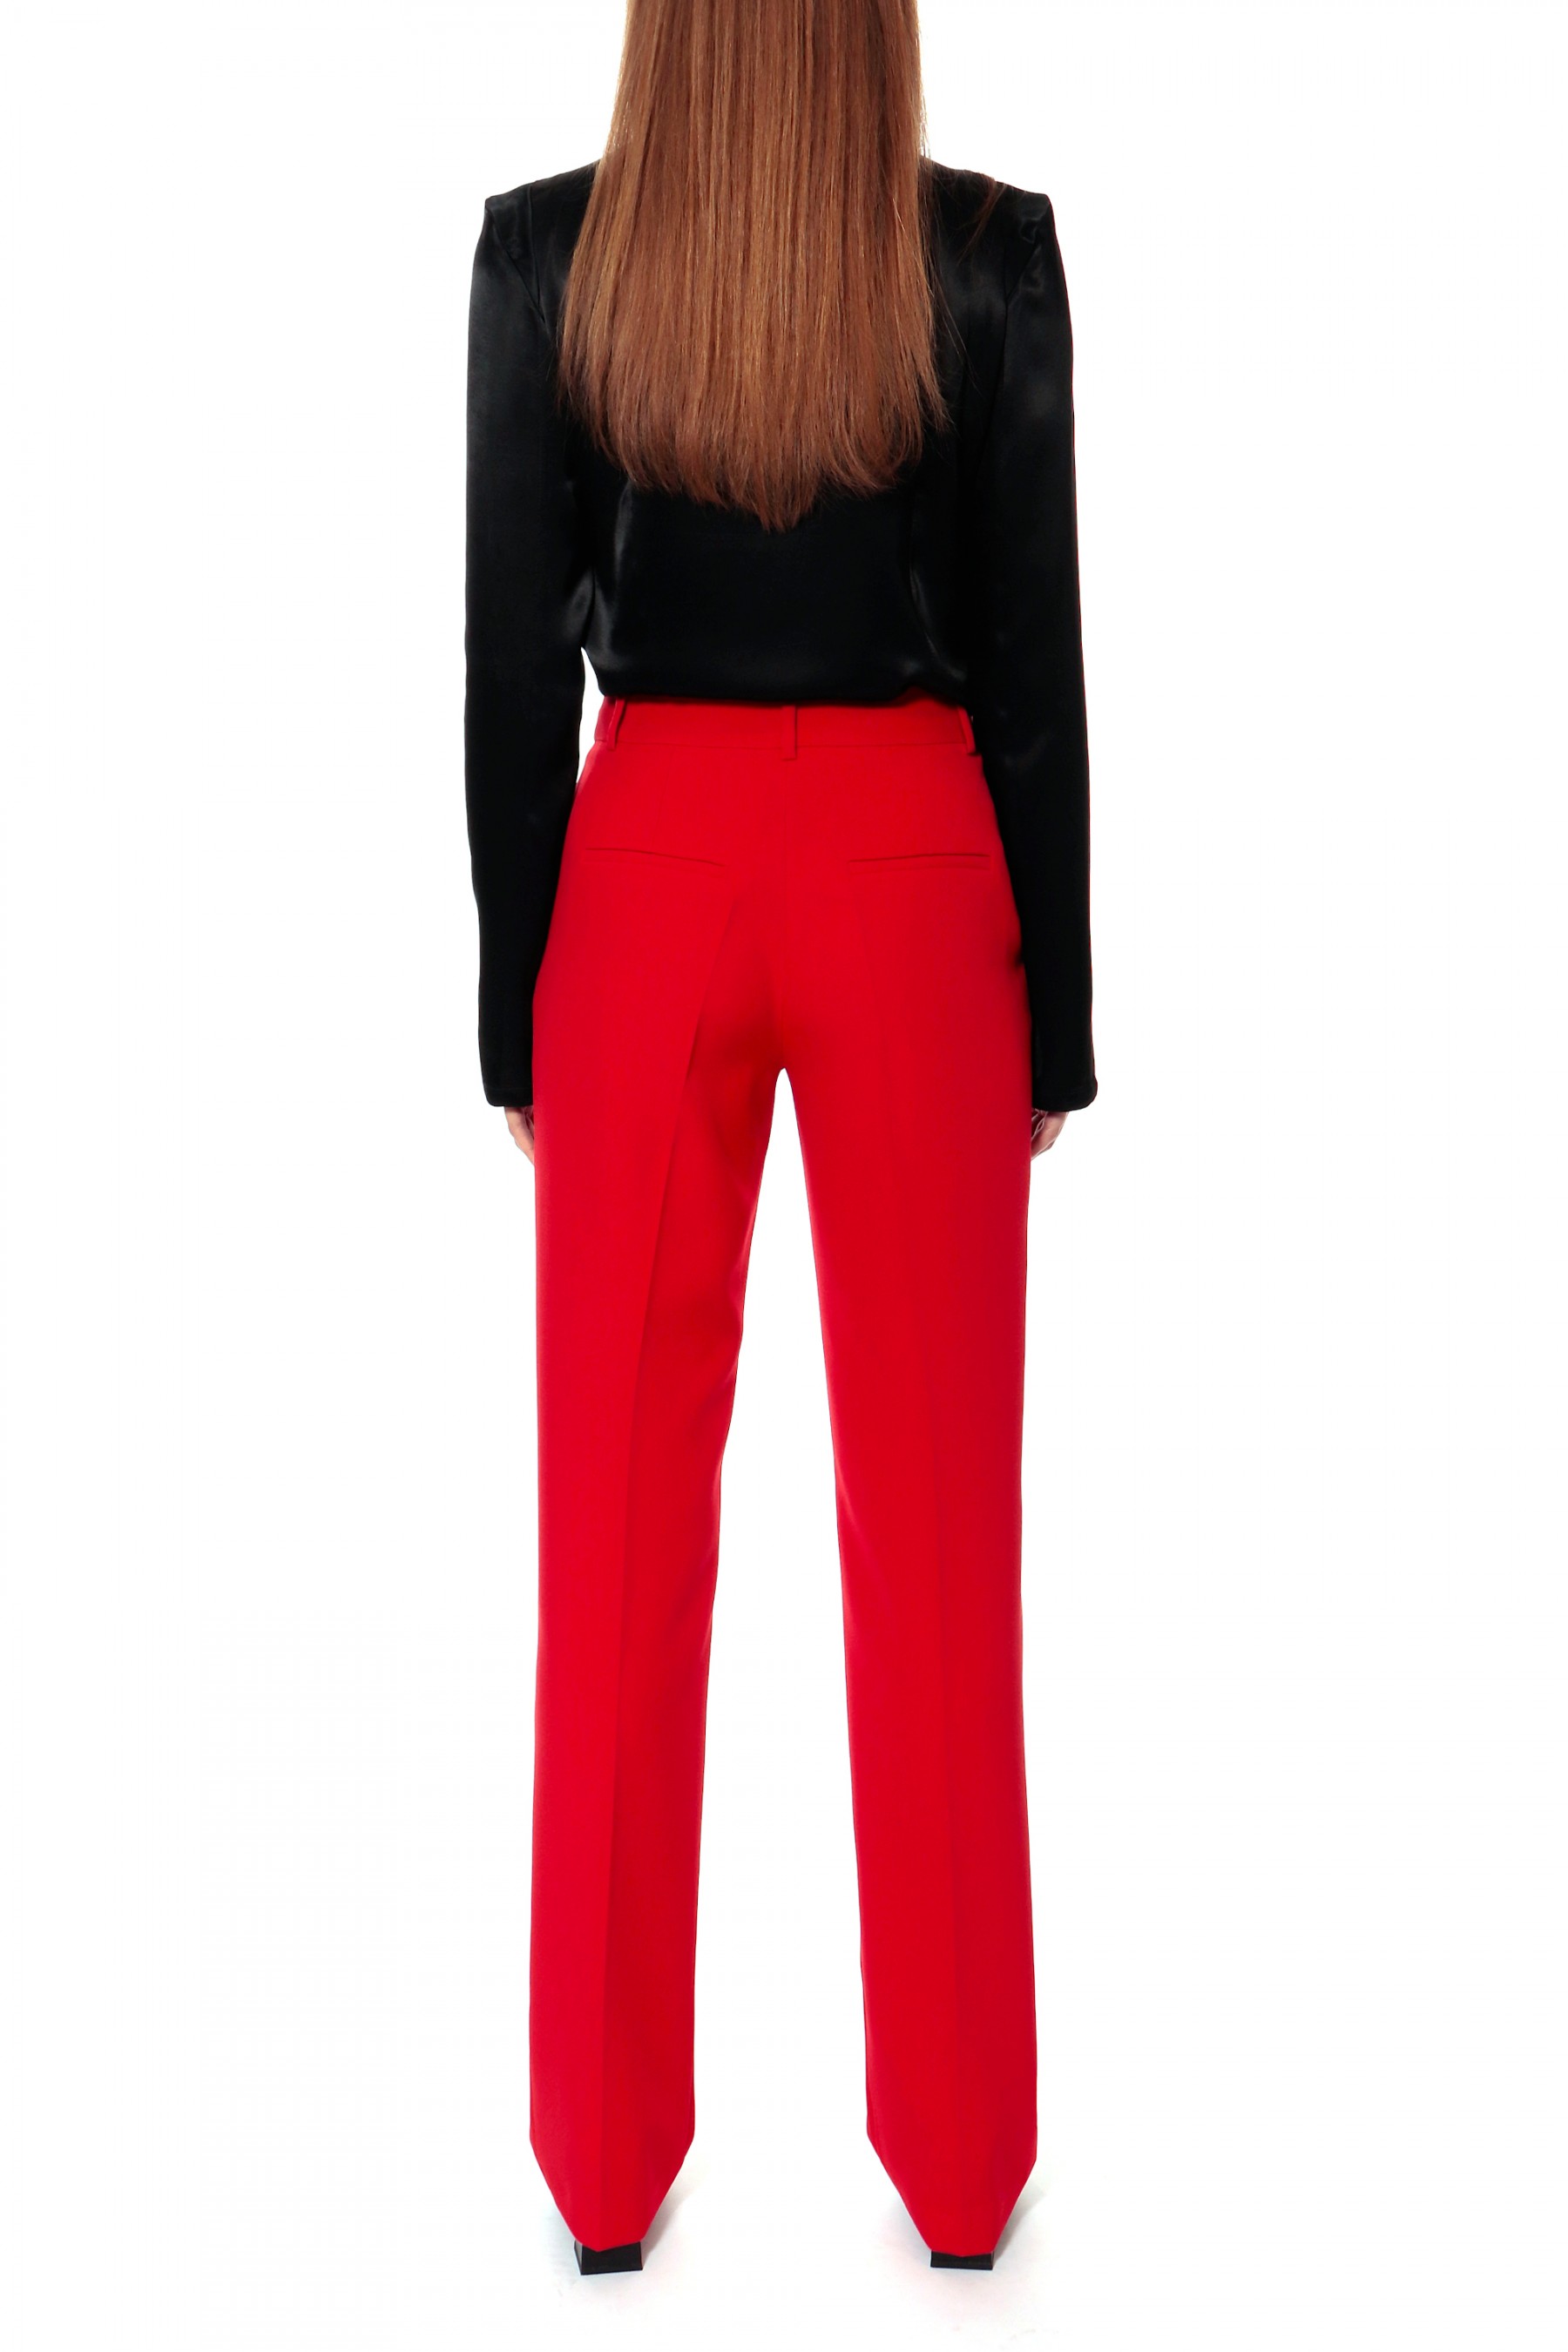 Shop Red High Waist Pants Online for Women at Best Price